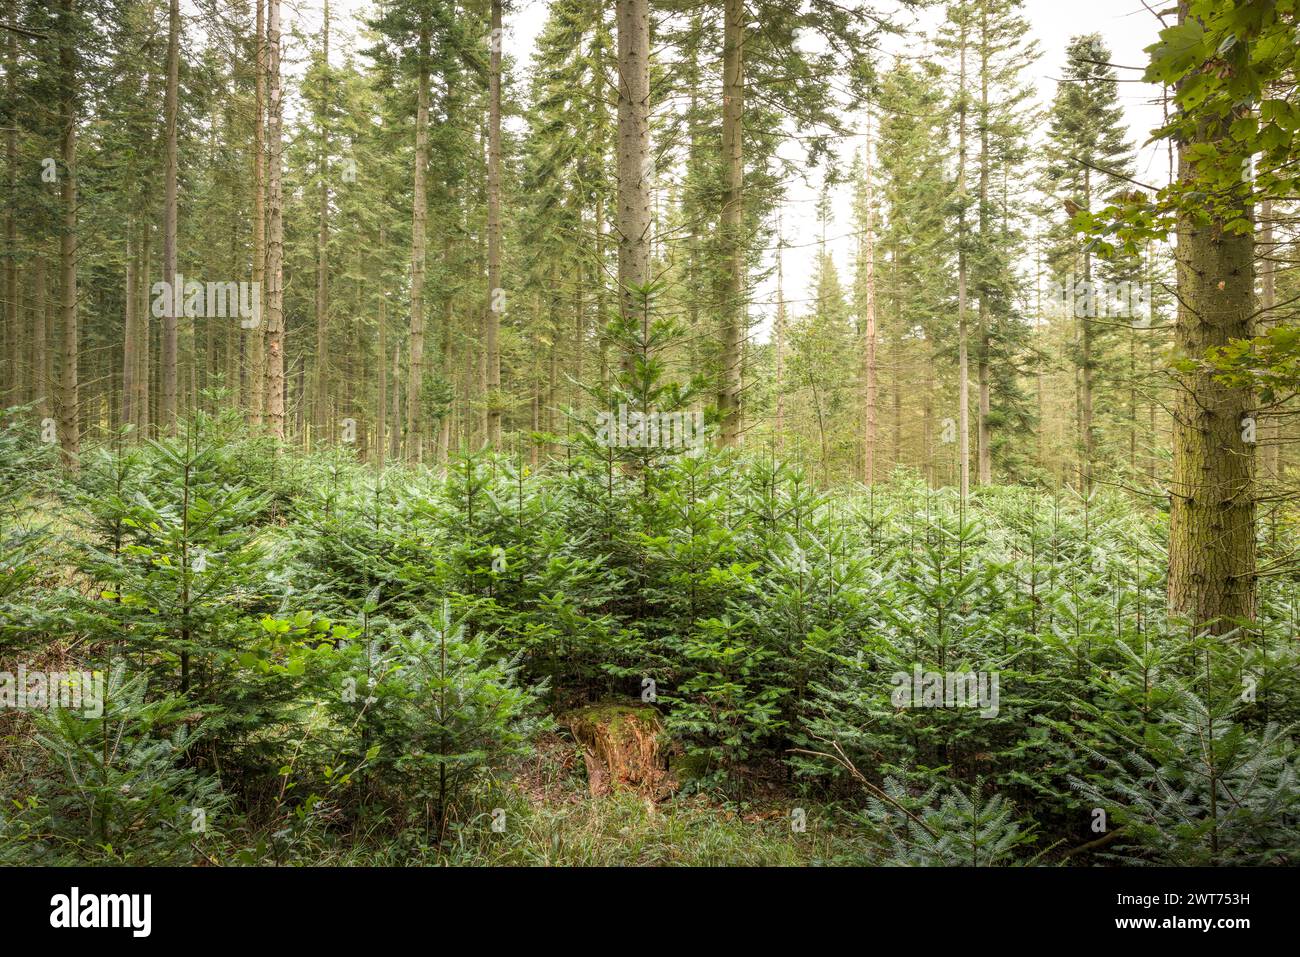 Reforestation. New conifer trees growing in a forest in Chiltern Hills. Wendover, Buckinghamshire, UK Stock Photo